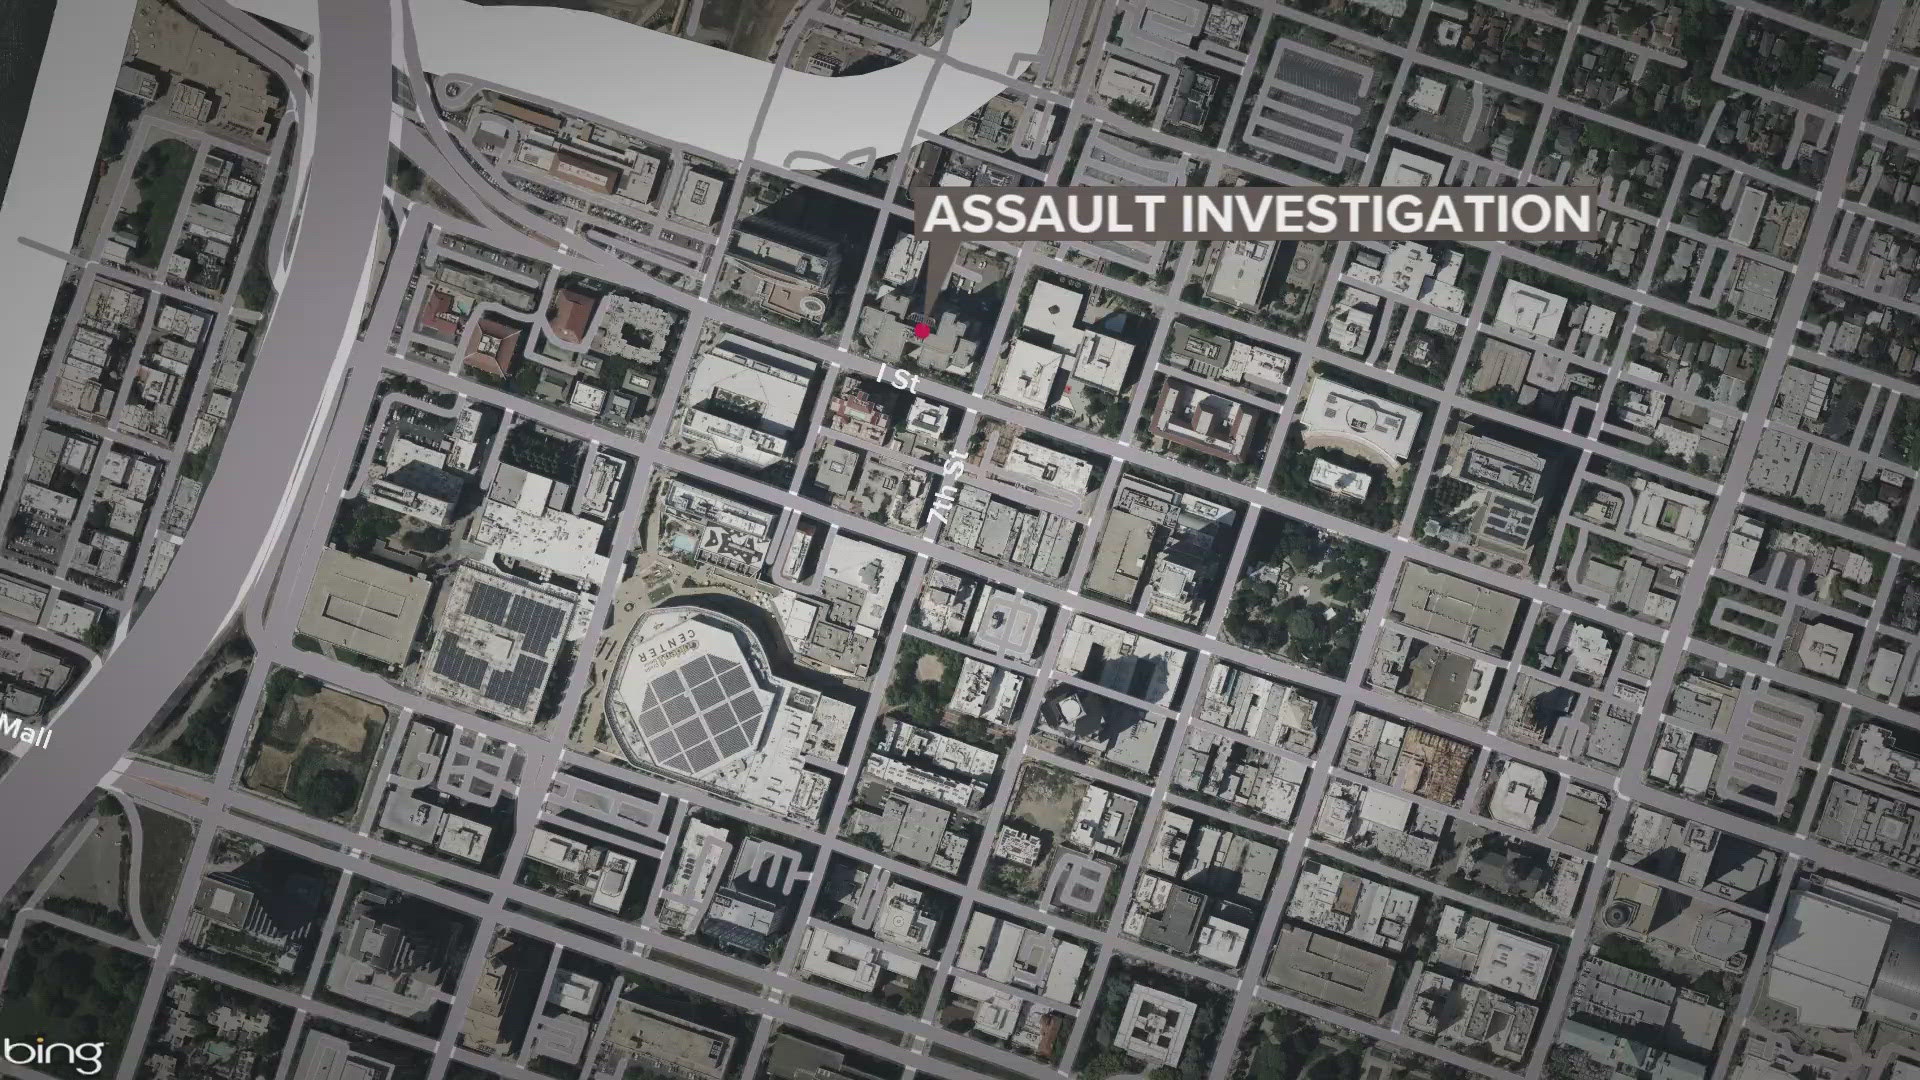 Police are investigating a deadly assault Monday in downtown Sacramento.